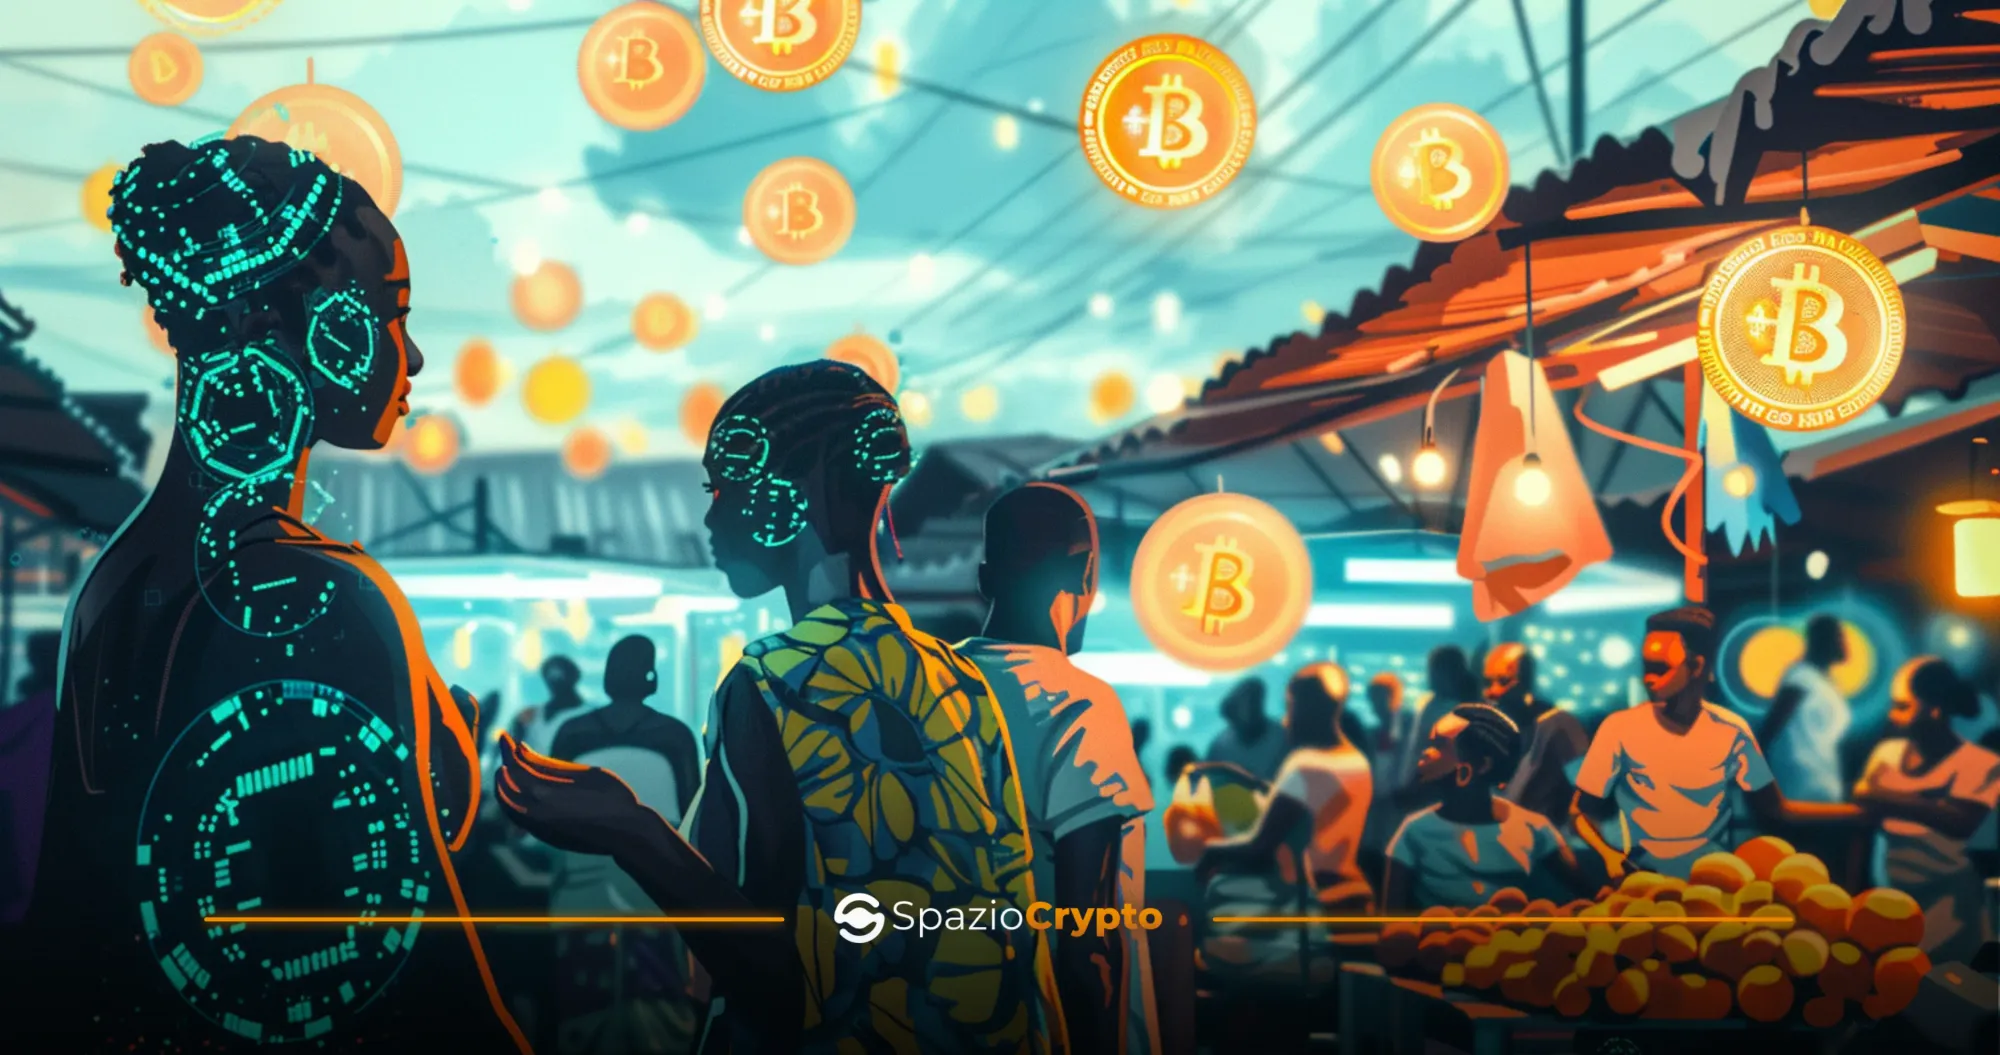 Solana Sets the African Cryptocurrency Market in Motion - Spaziocrypto